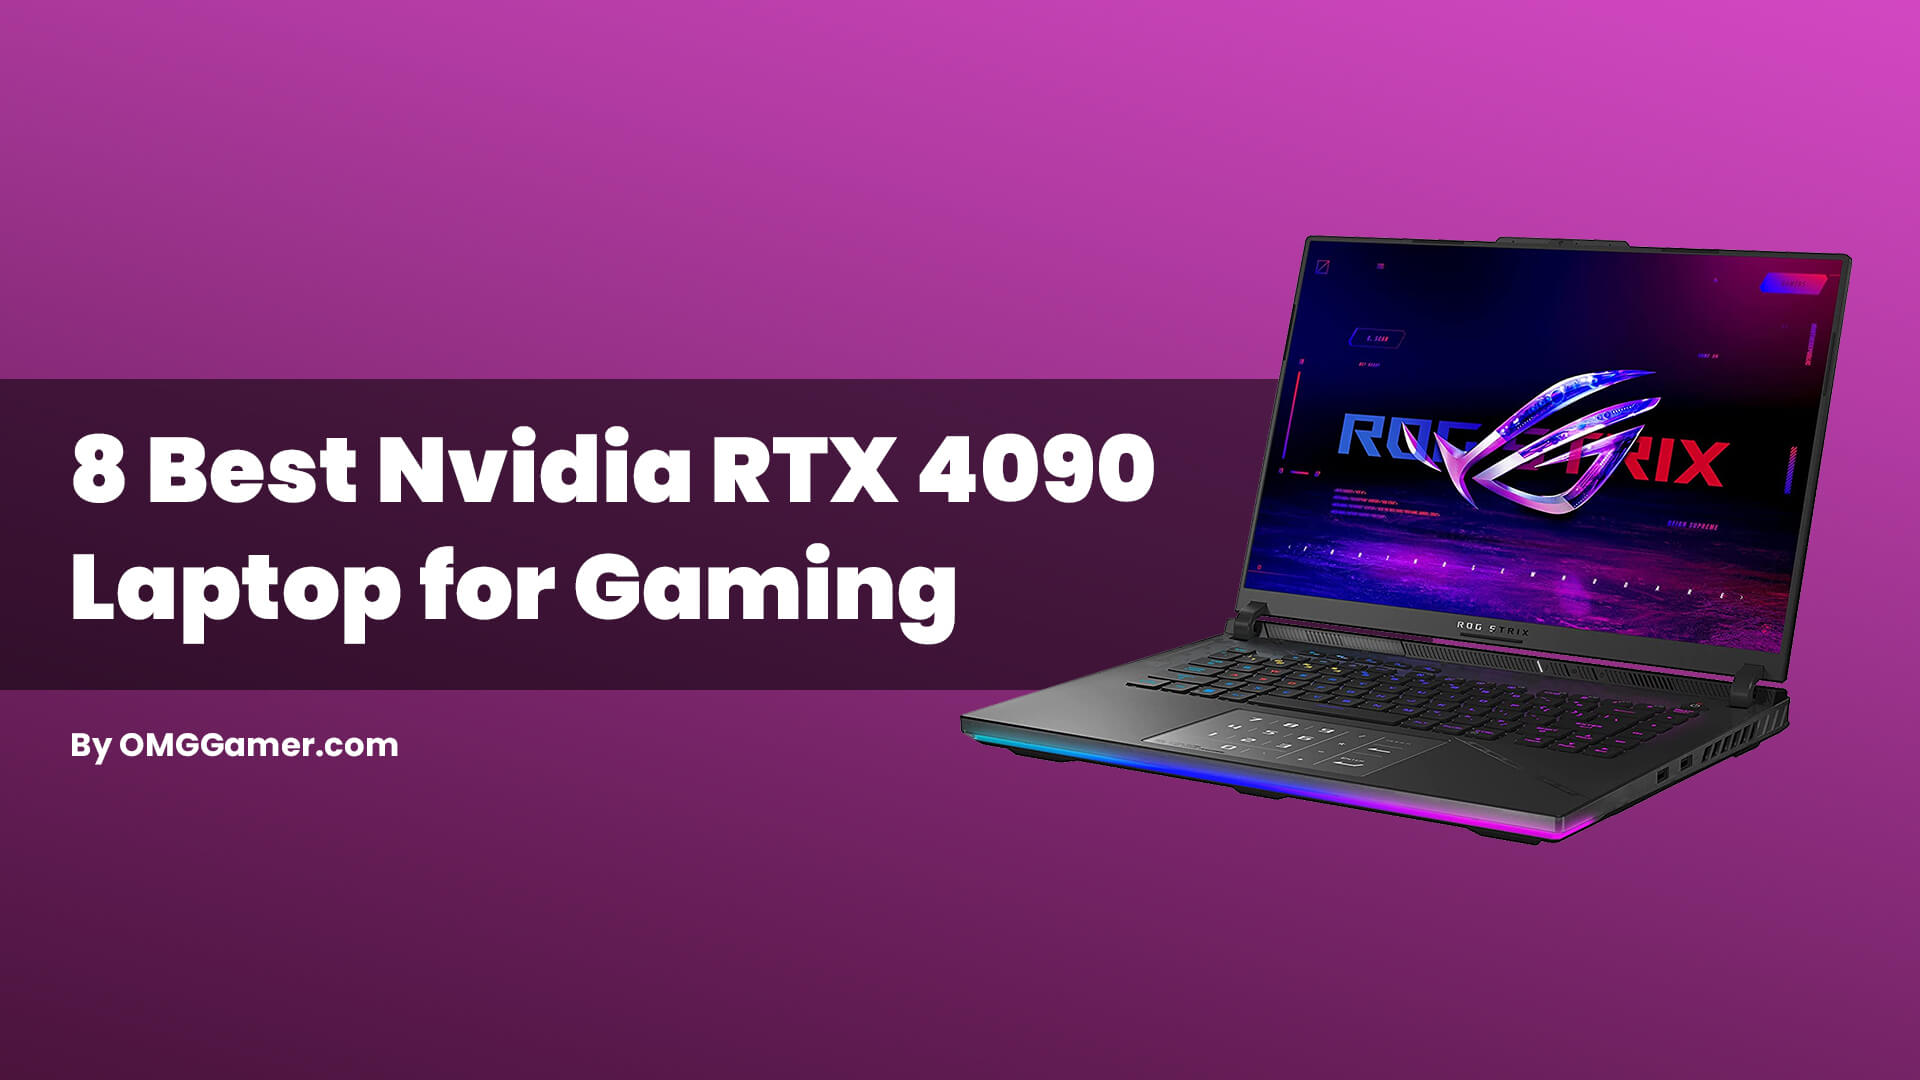 Best Nvidia RTX 4090 Laptop for Gaming